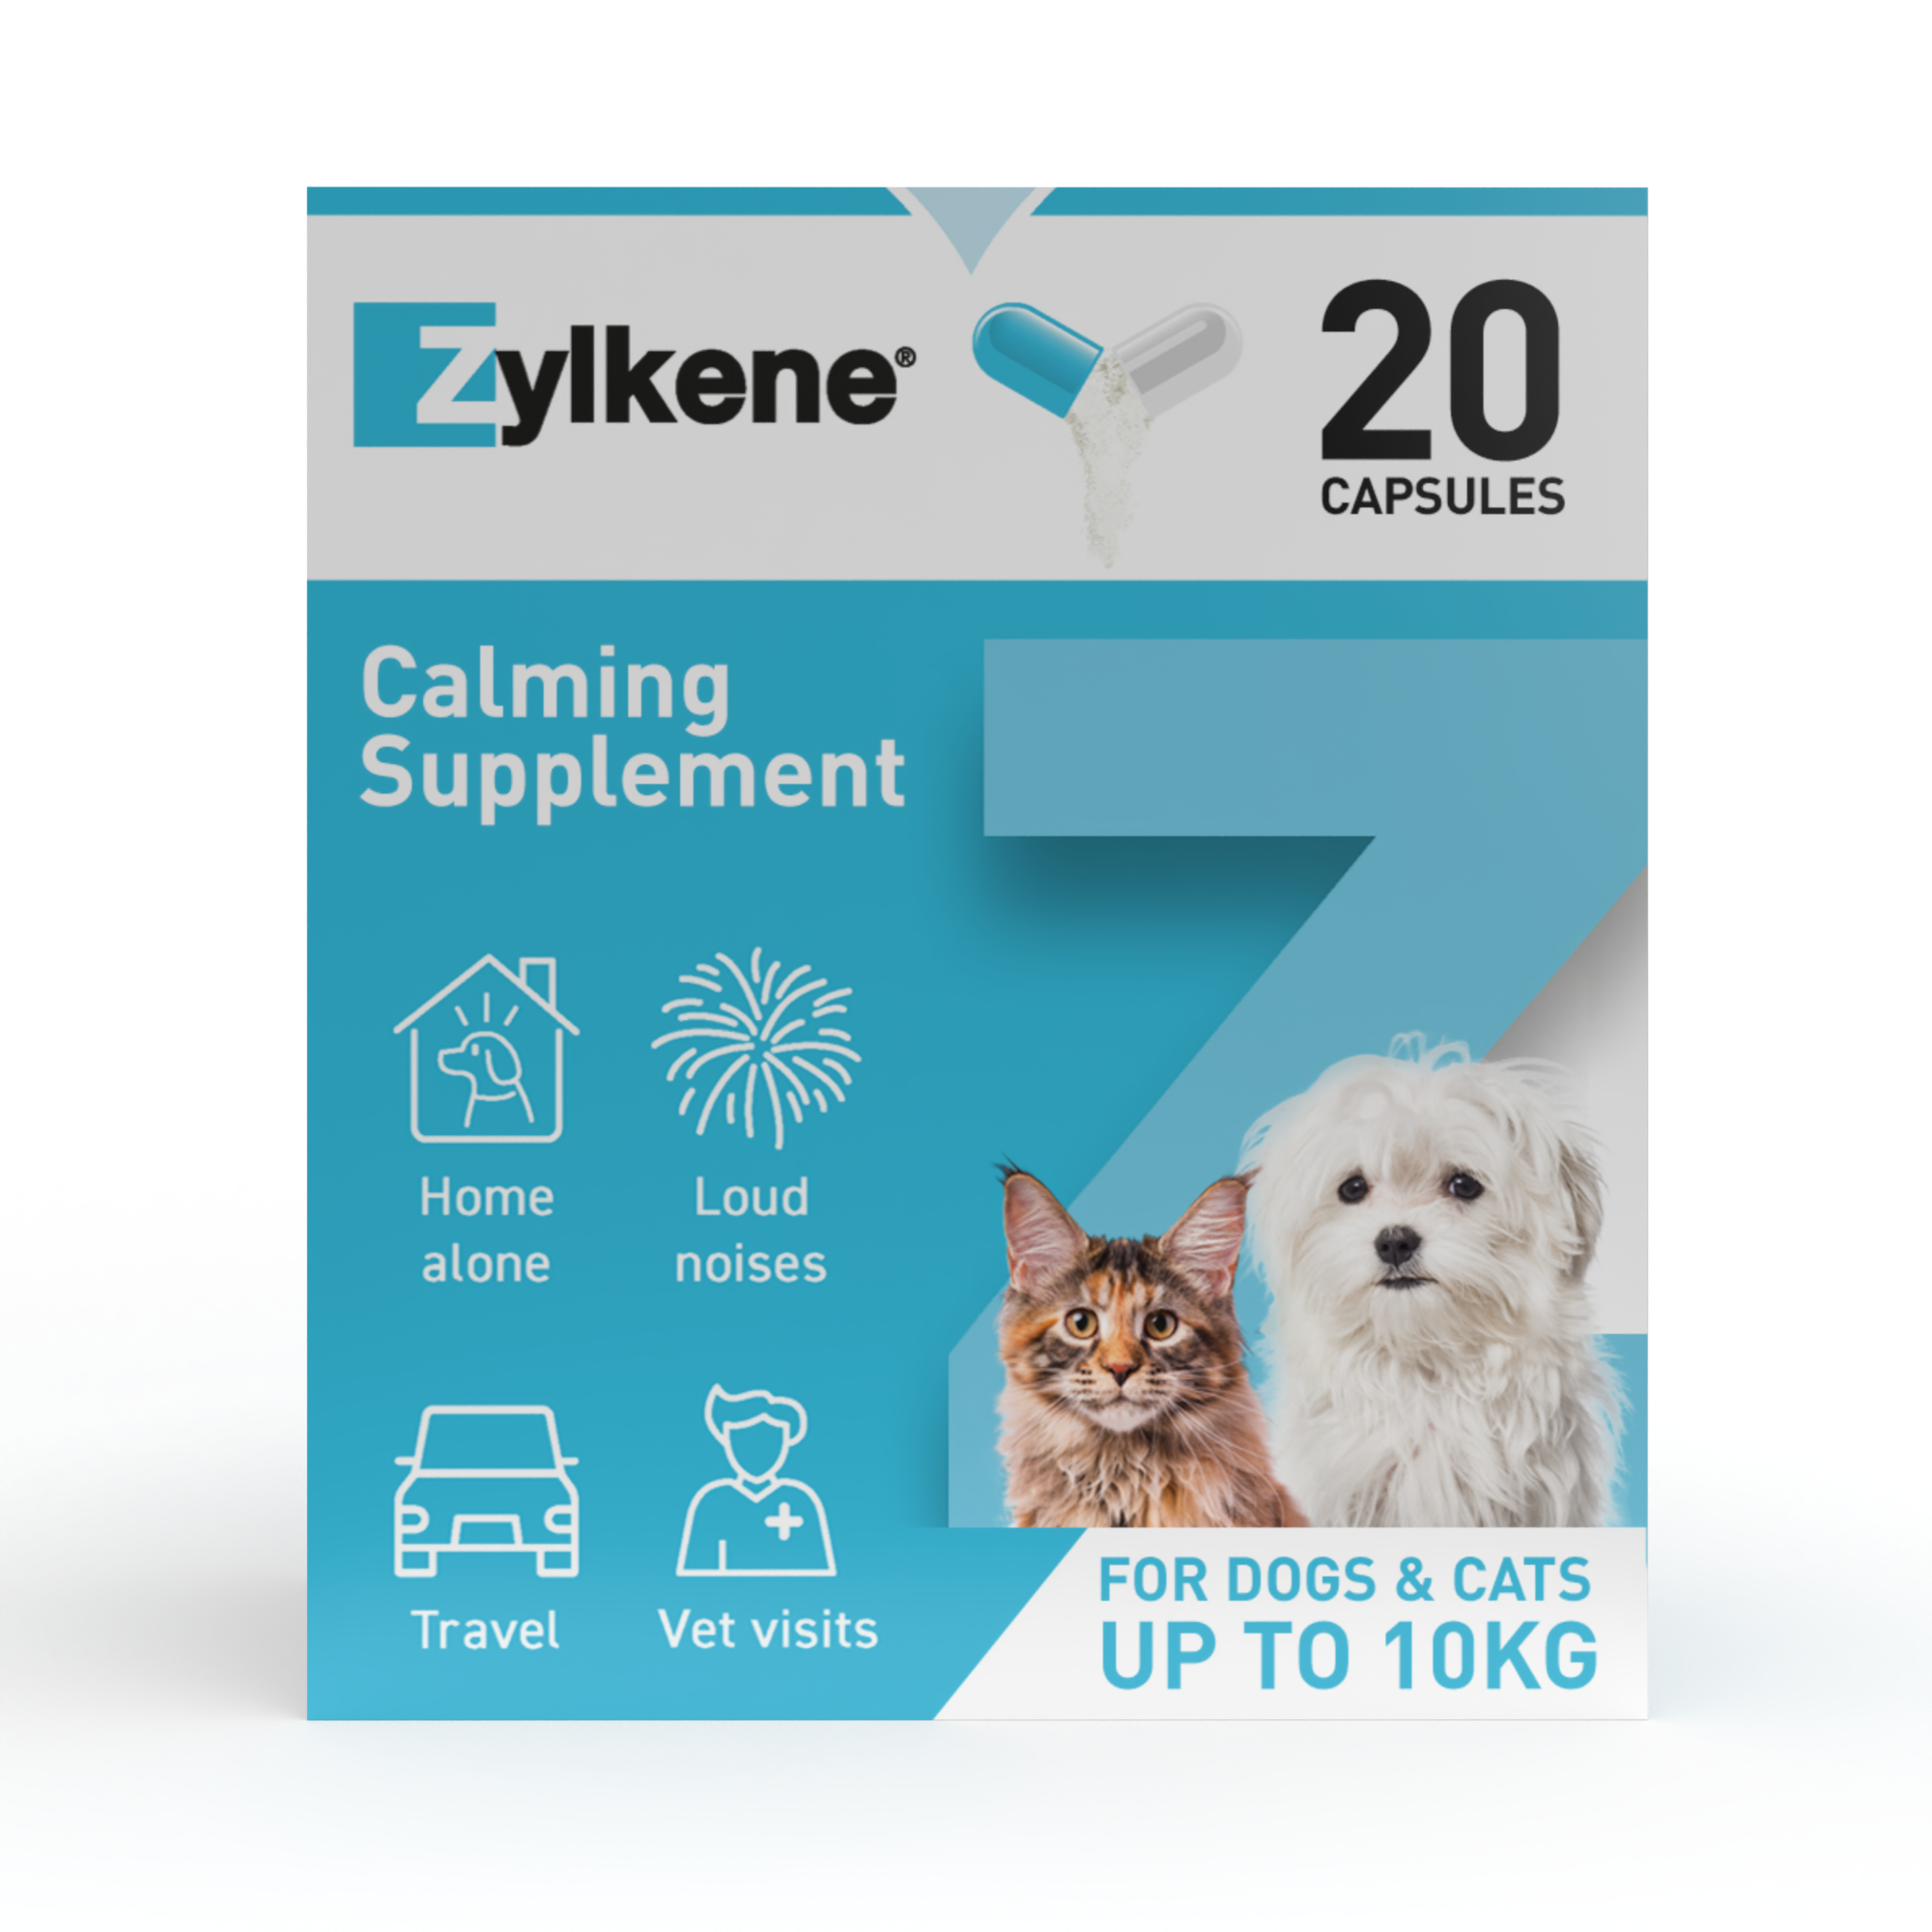 Zylkene Calming Supplement for Cats and Dogs Up to 10kg